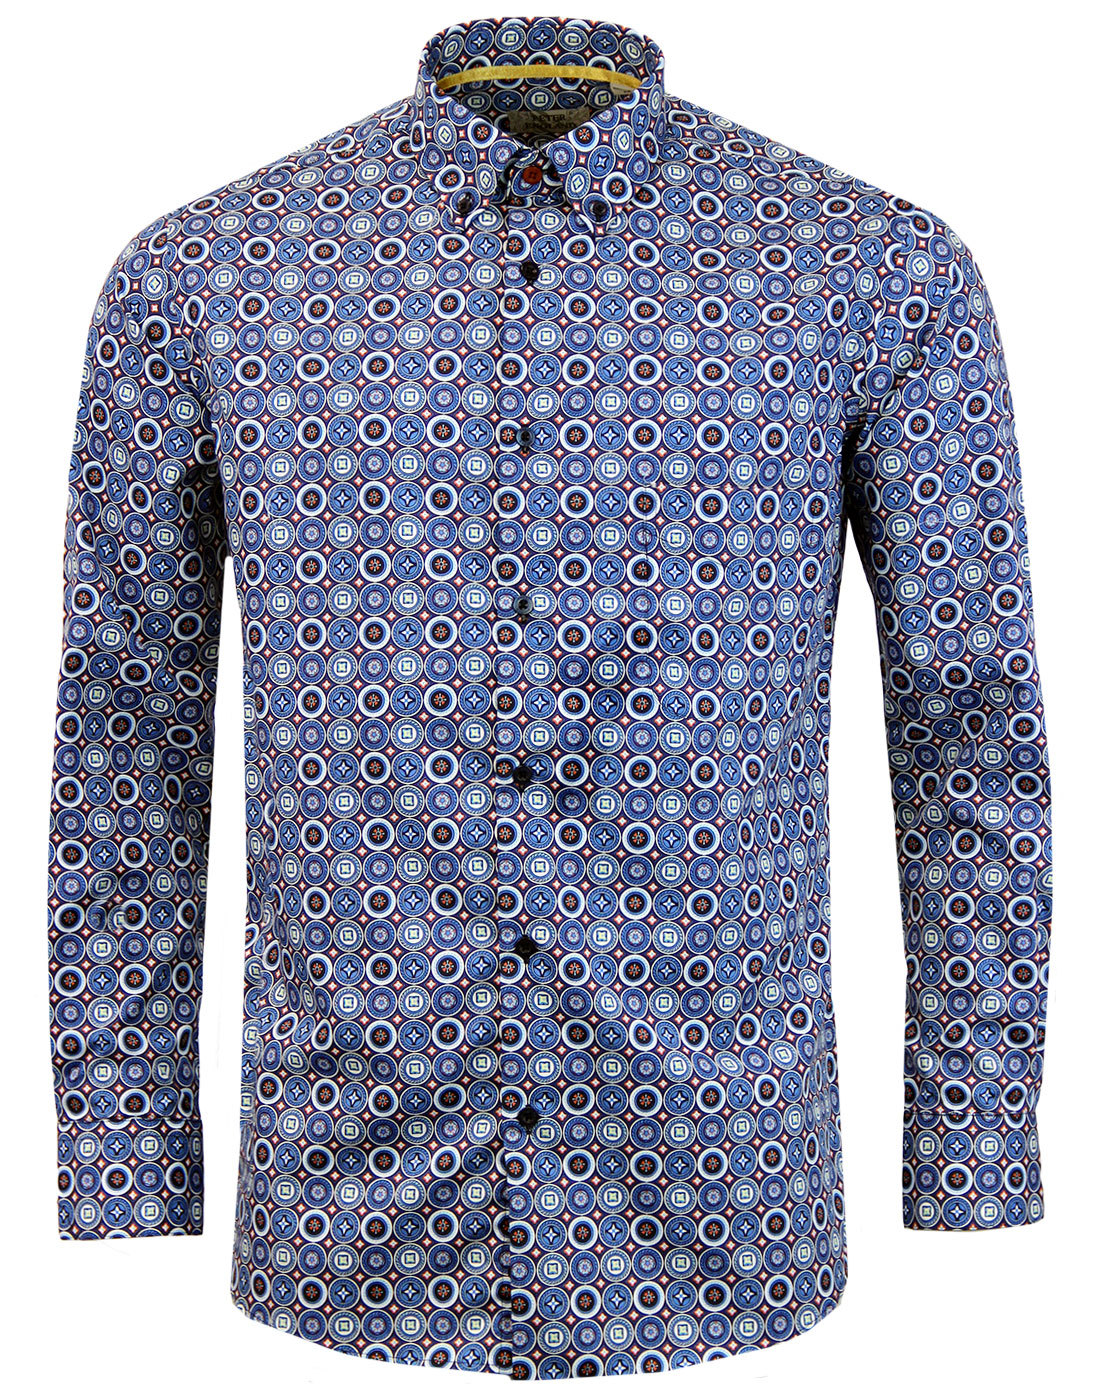 PETER ENGLAND 1960s Mod Psychedelic Shield Shirt